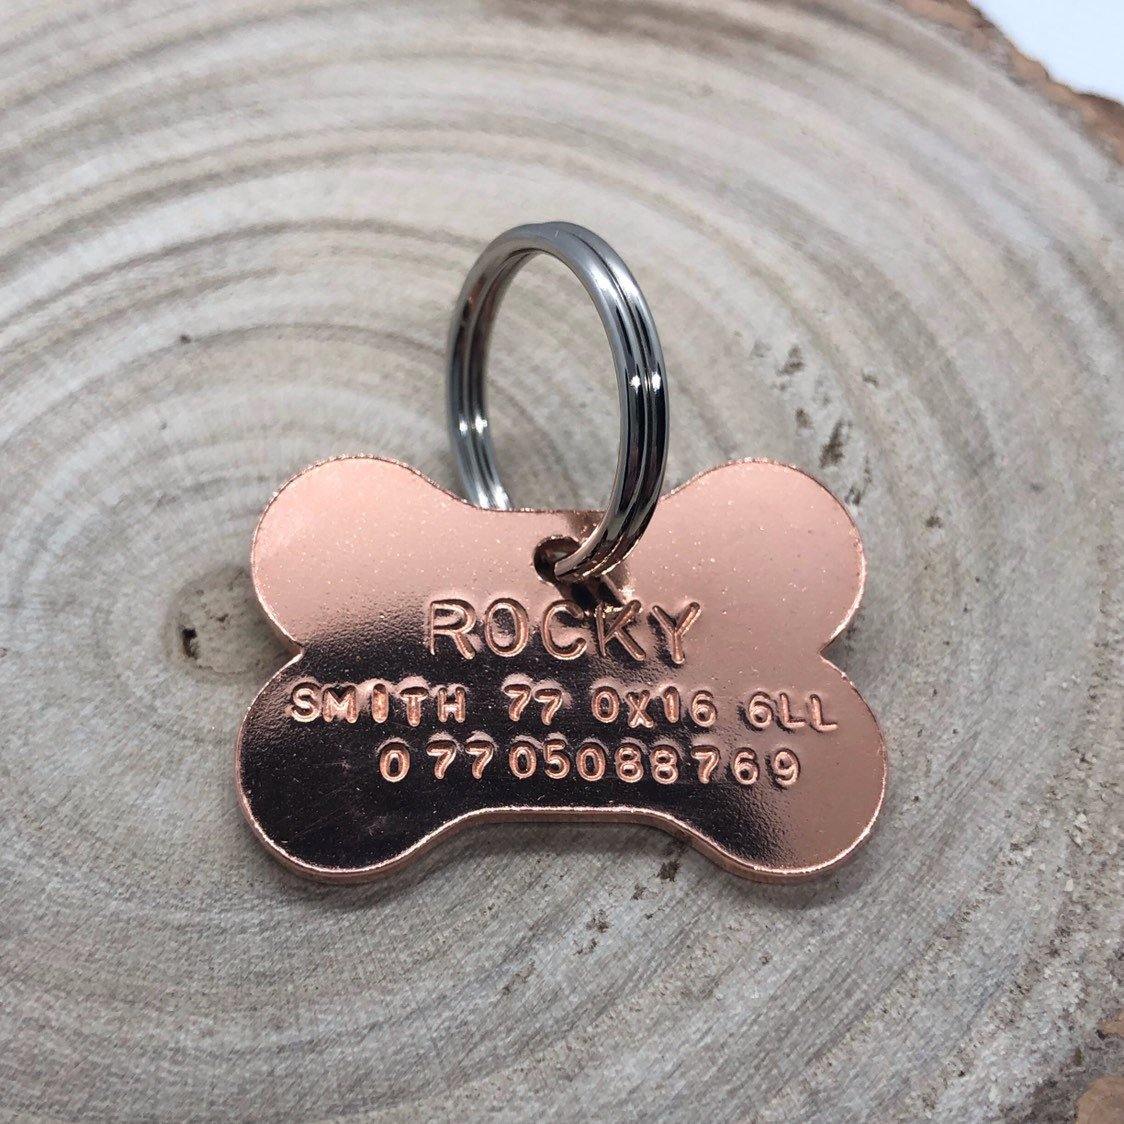 Copper Bone Dog ID Tag - The Little Stamping Co.